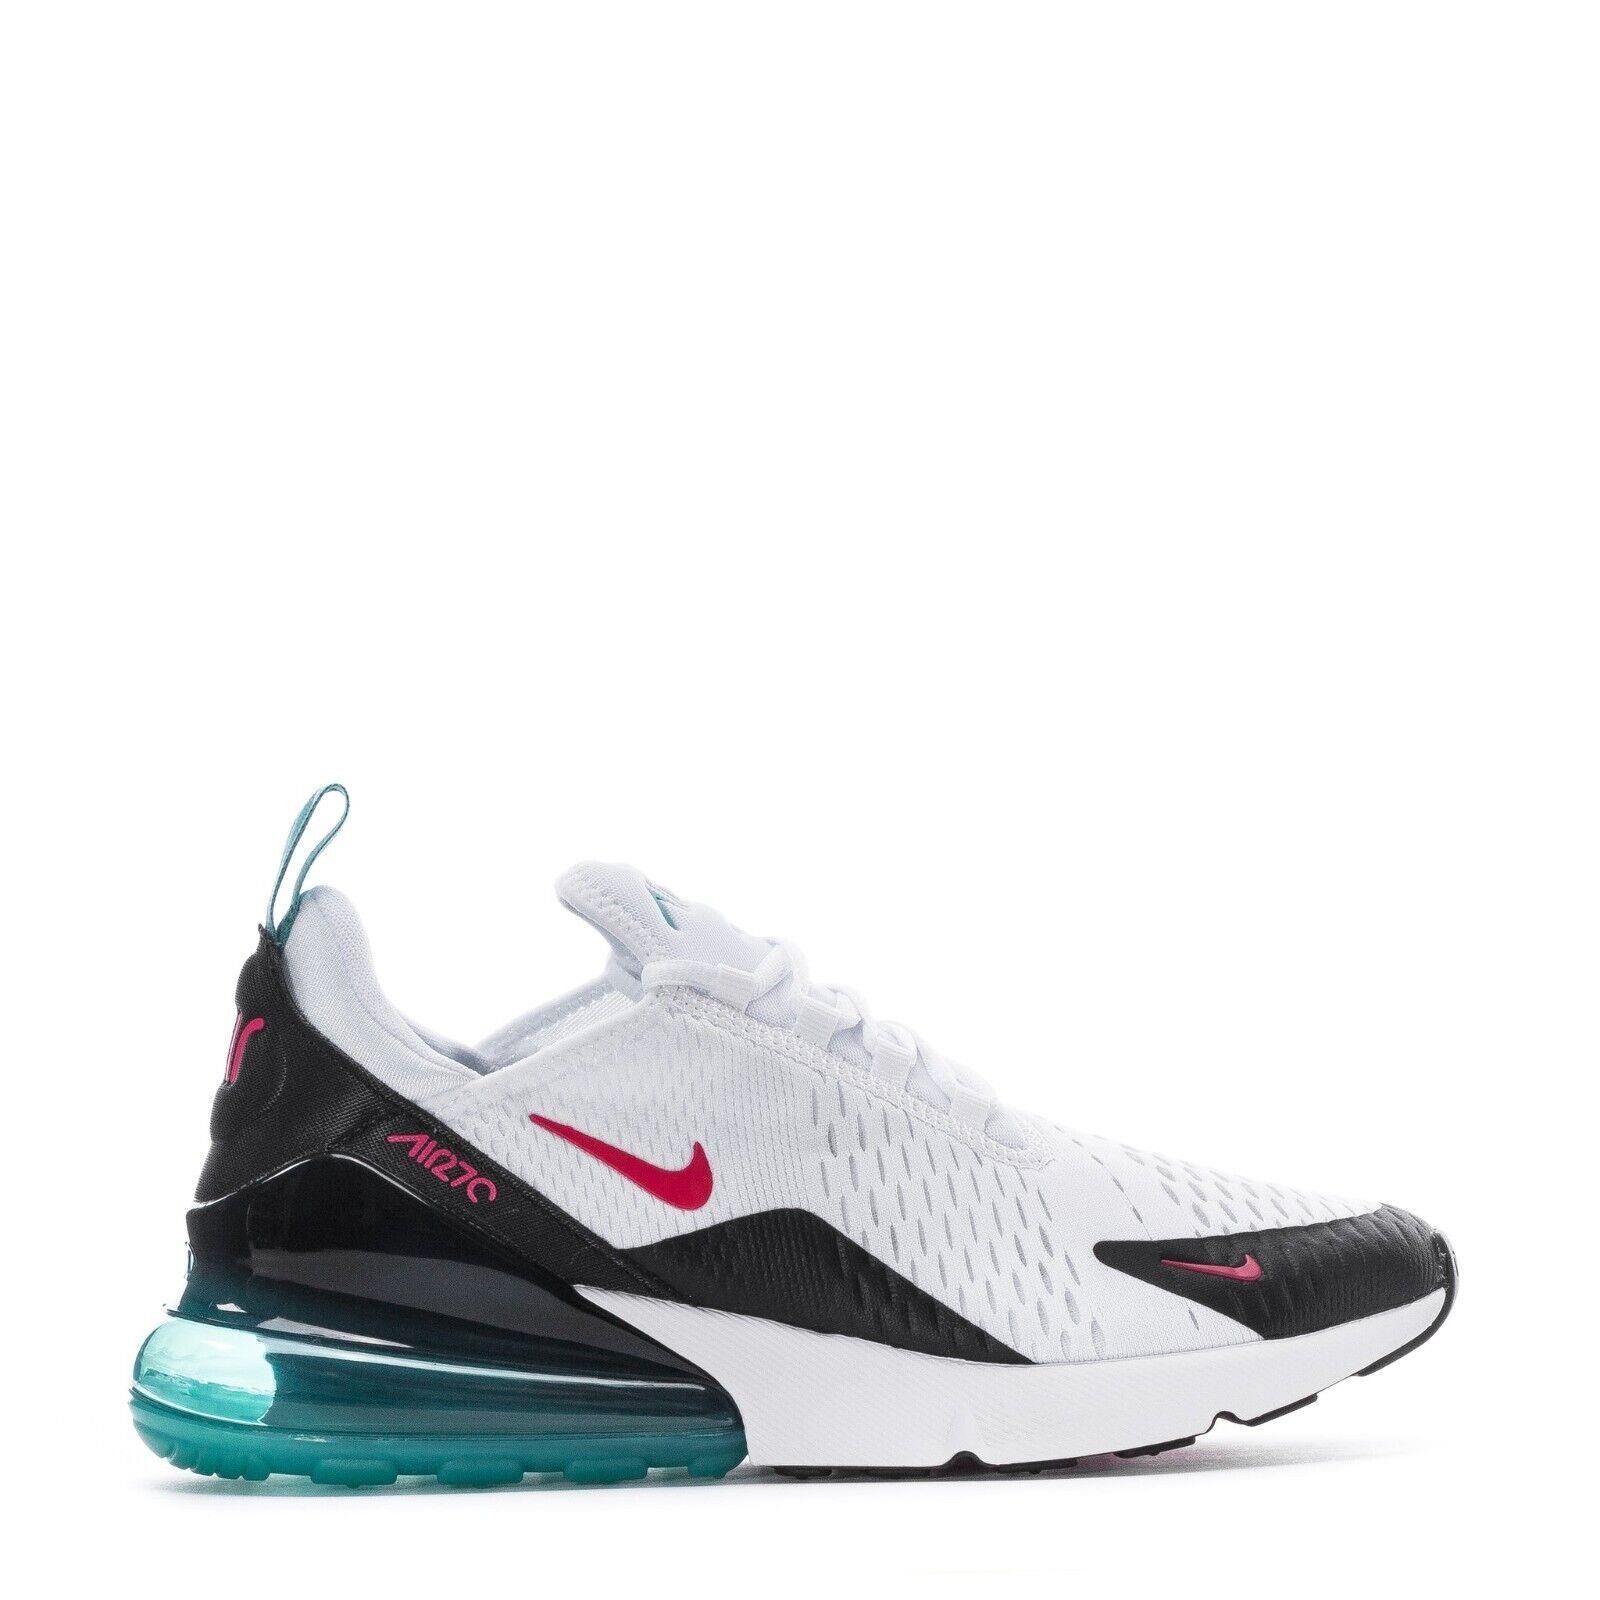 Mens Nike Air Max 270 DR9876-100 White/rush Pink/washed Teal/black Shoes